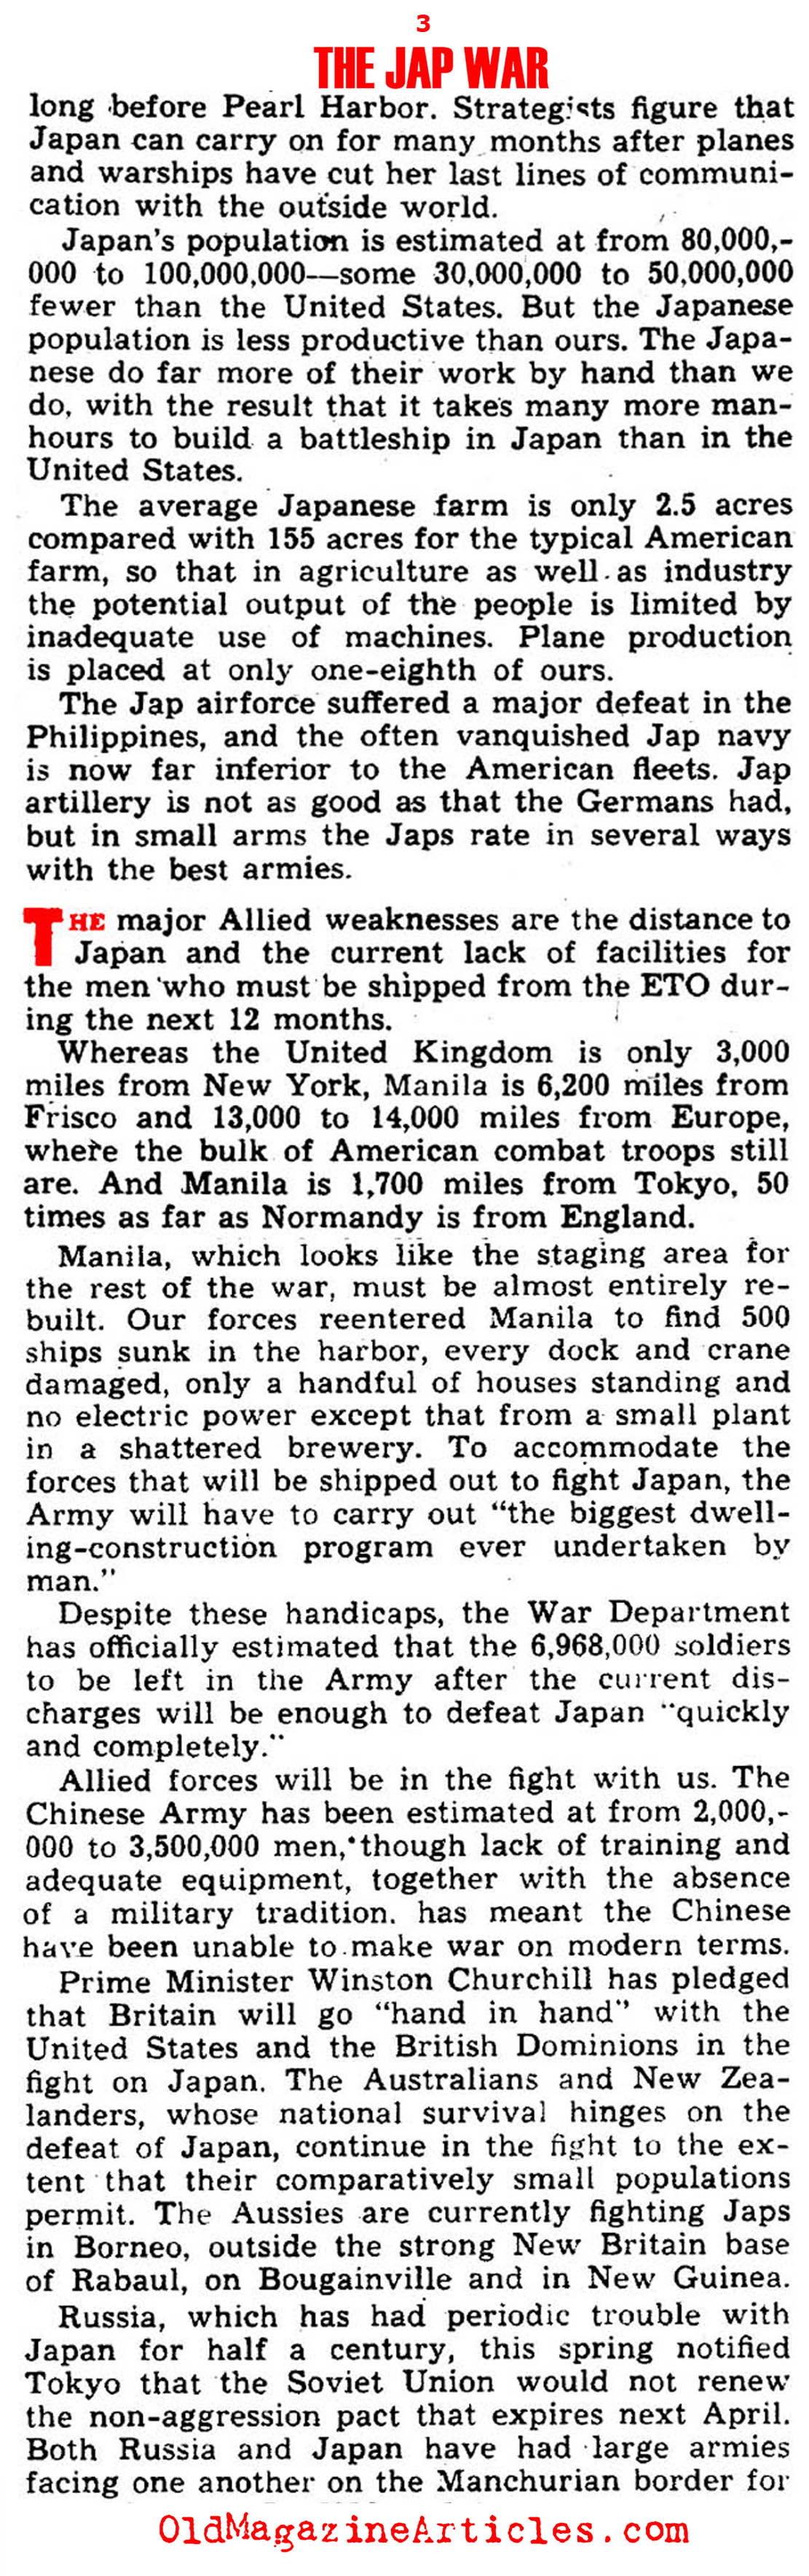 1945  Victory Strategies for the Pacific Theater (Yank Magazine, 1945)